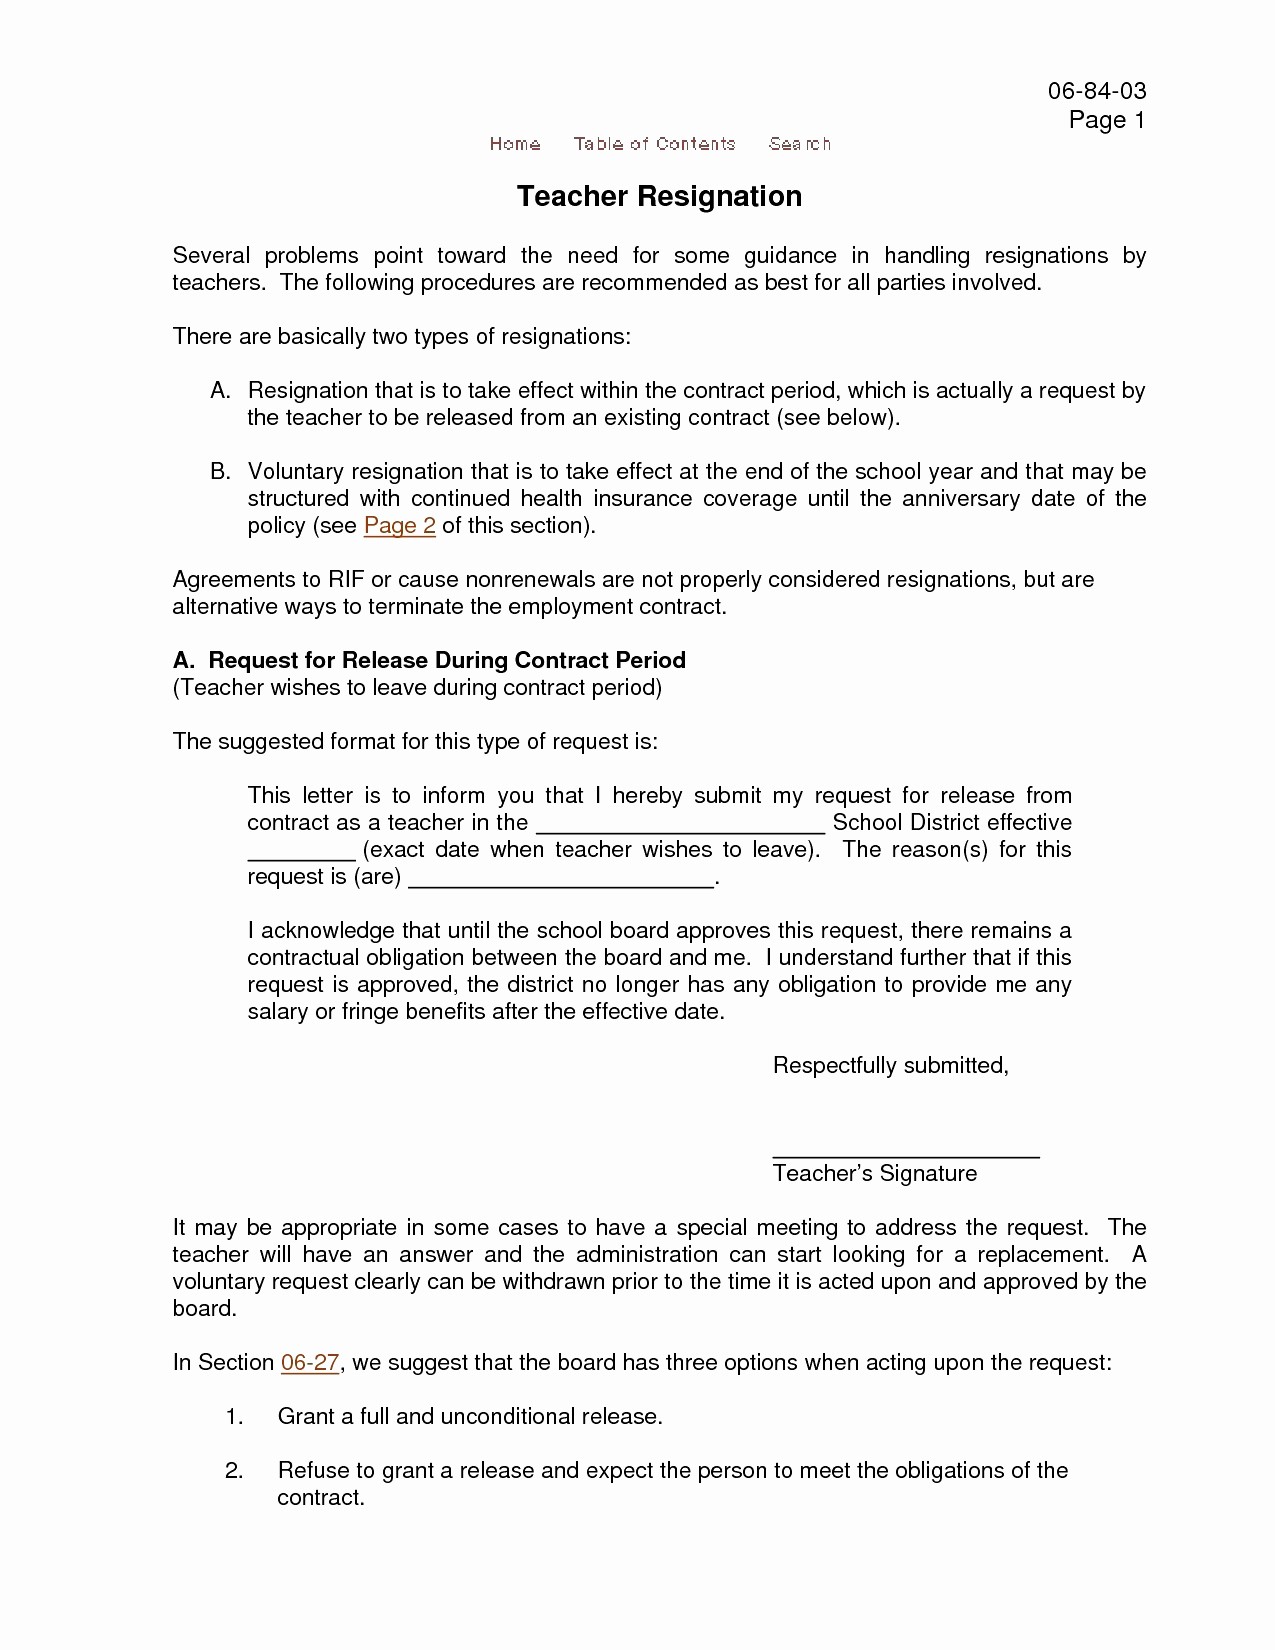 Contracts Outline Download New Document